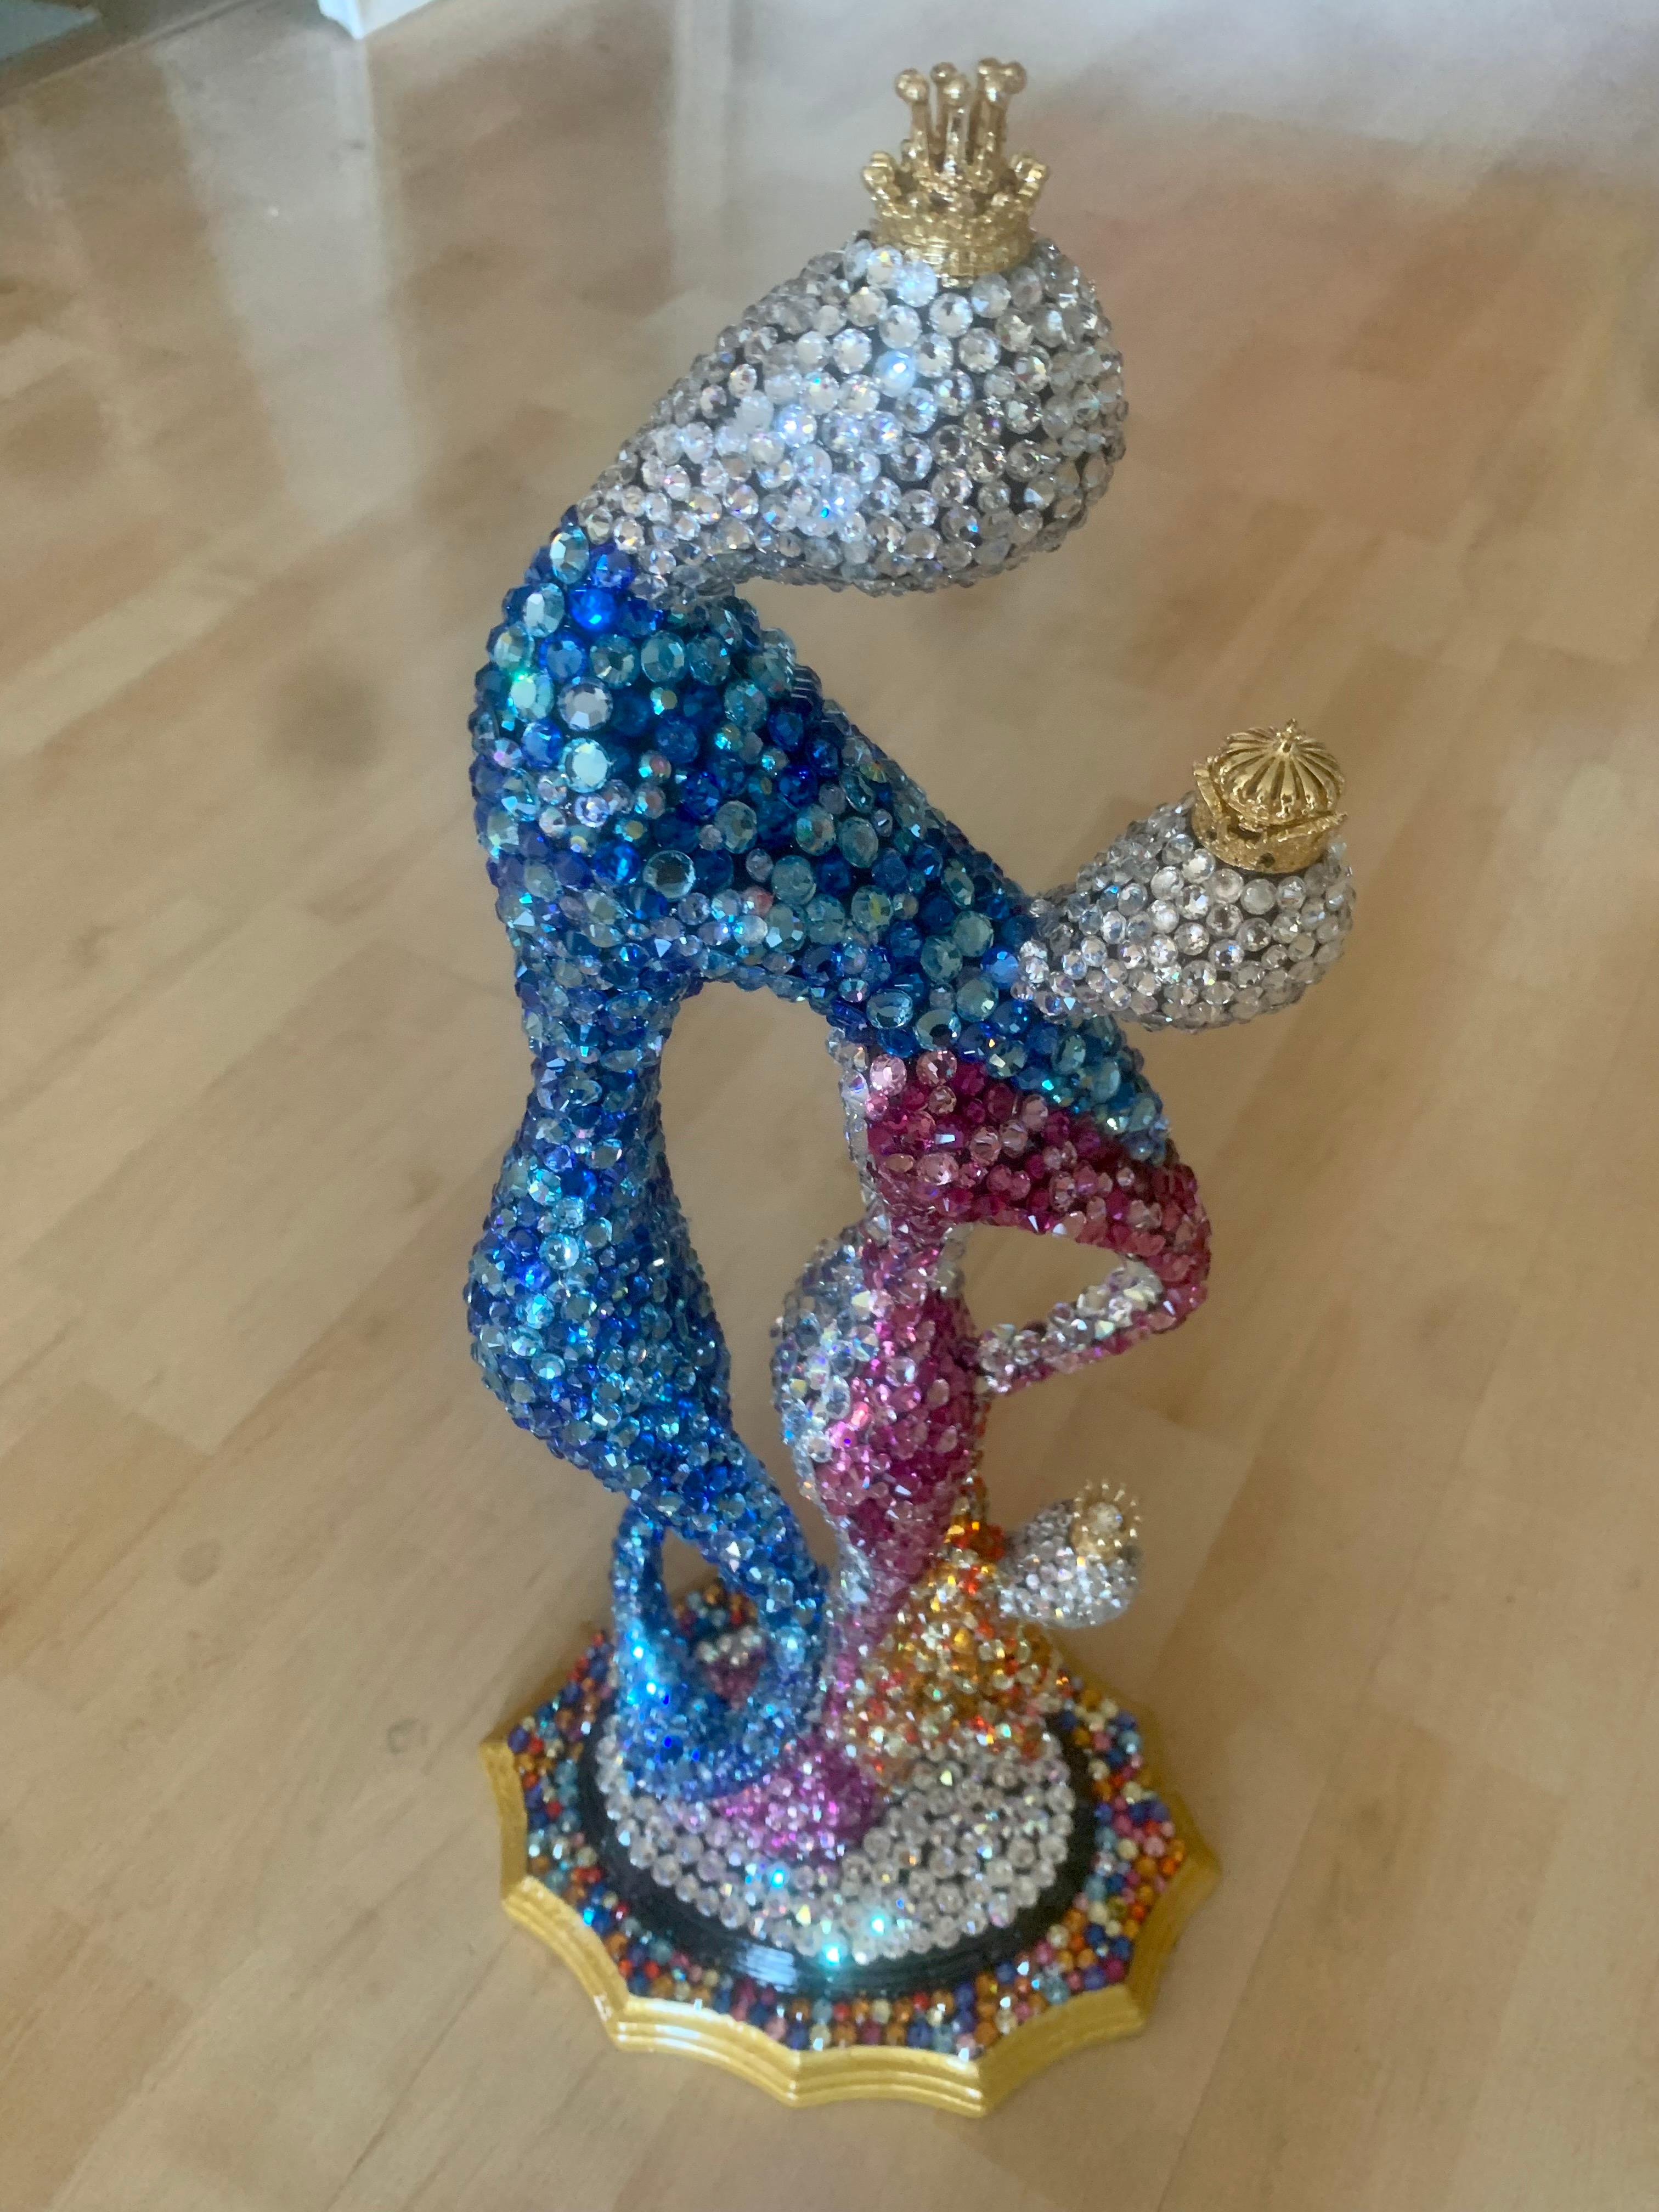 THE ROYAL FAMILY (1 Of a Kind Sculpture W/ Genuine Swarovski Crystals) - Contemporary Art by Mauro Oliveira